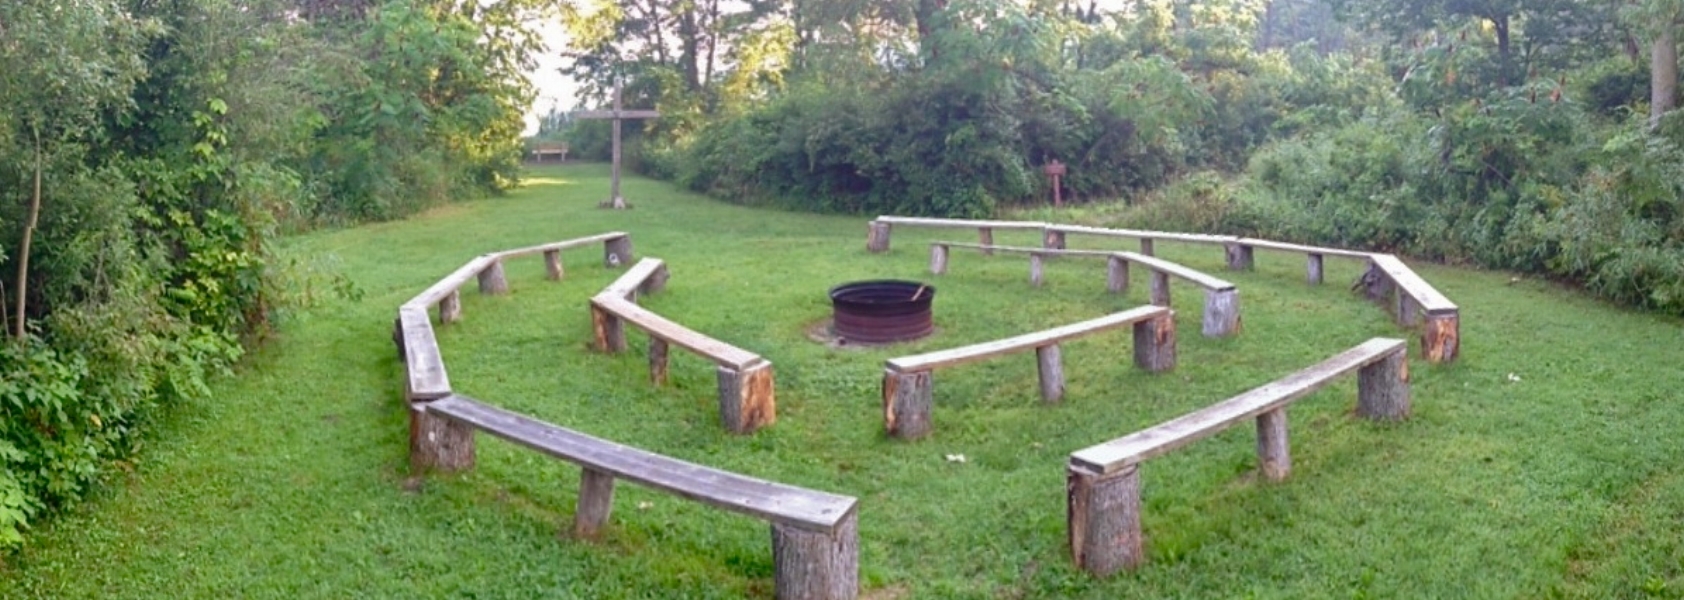  Our campfire area can seat about 75 people around a centrally located fire ring. It's very near Round Lake, so evening sunsets will be able to set the mood for your group here. We have also recently updated our benches. 